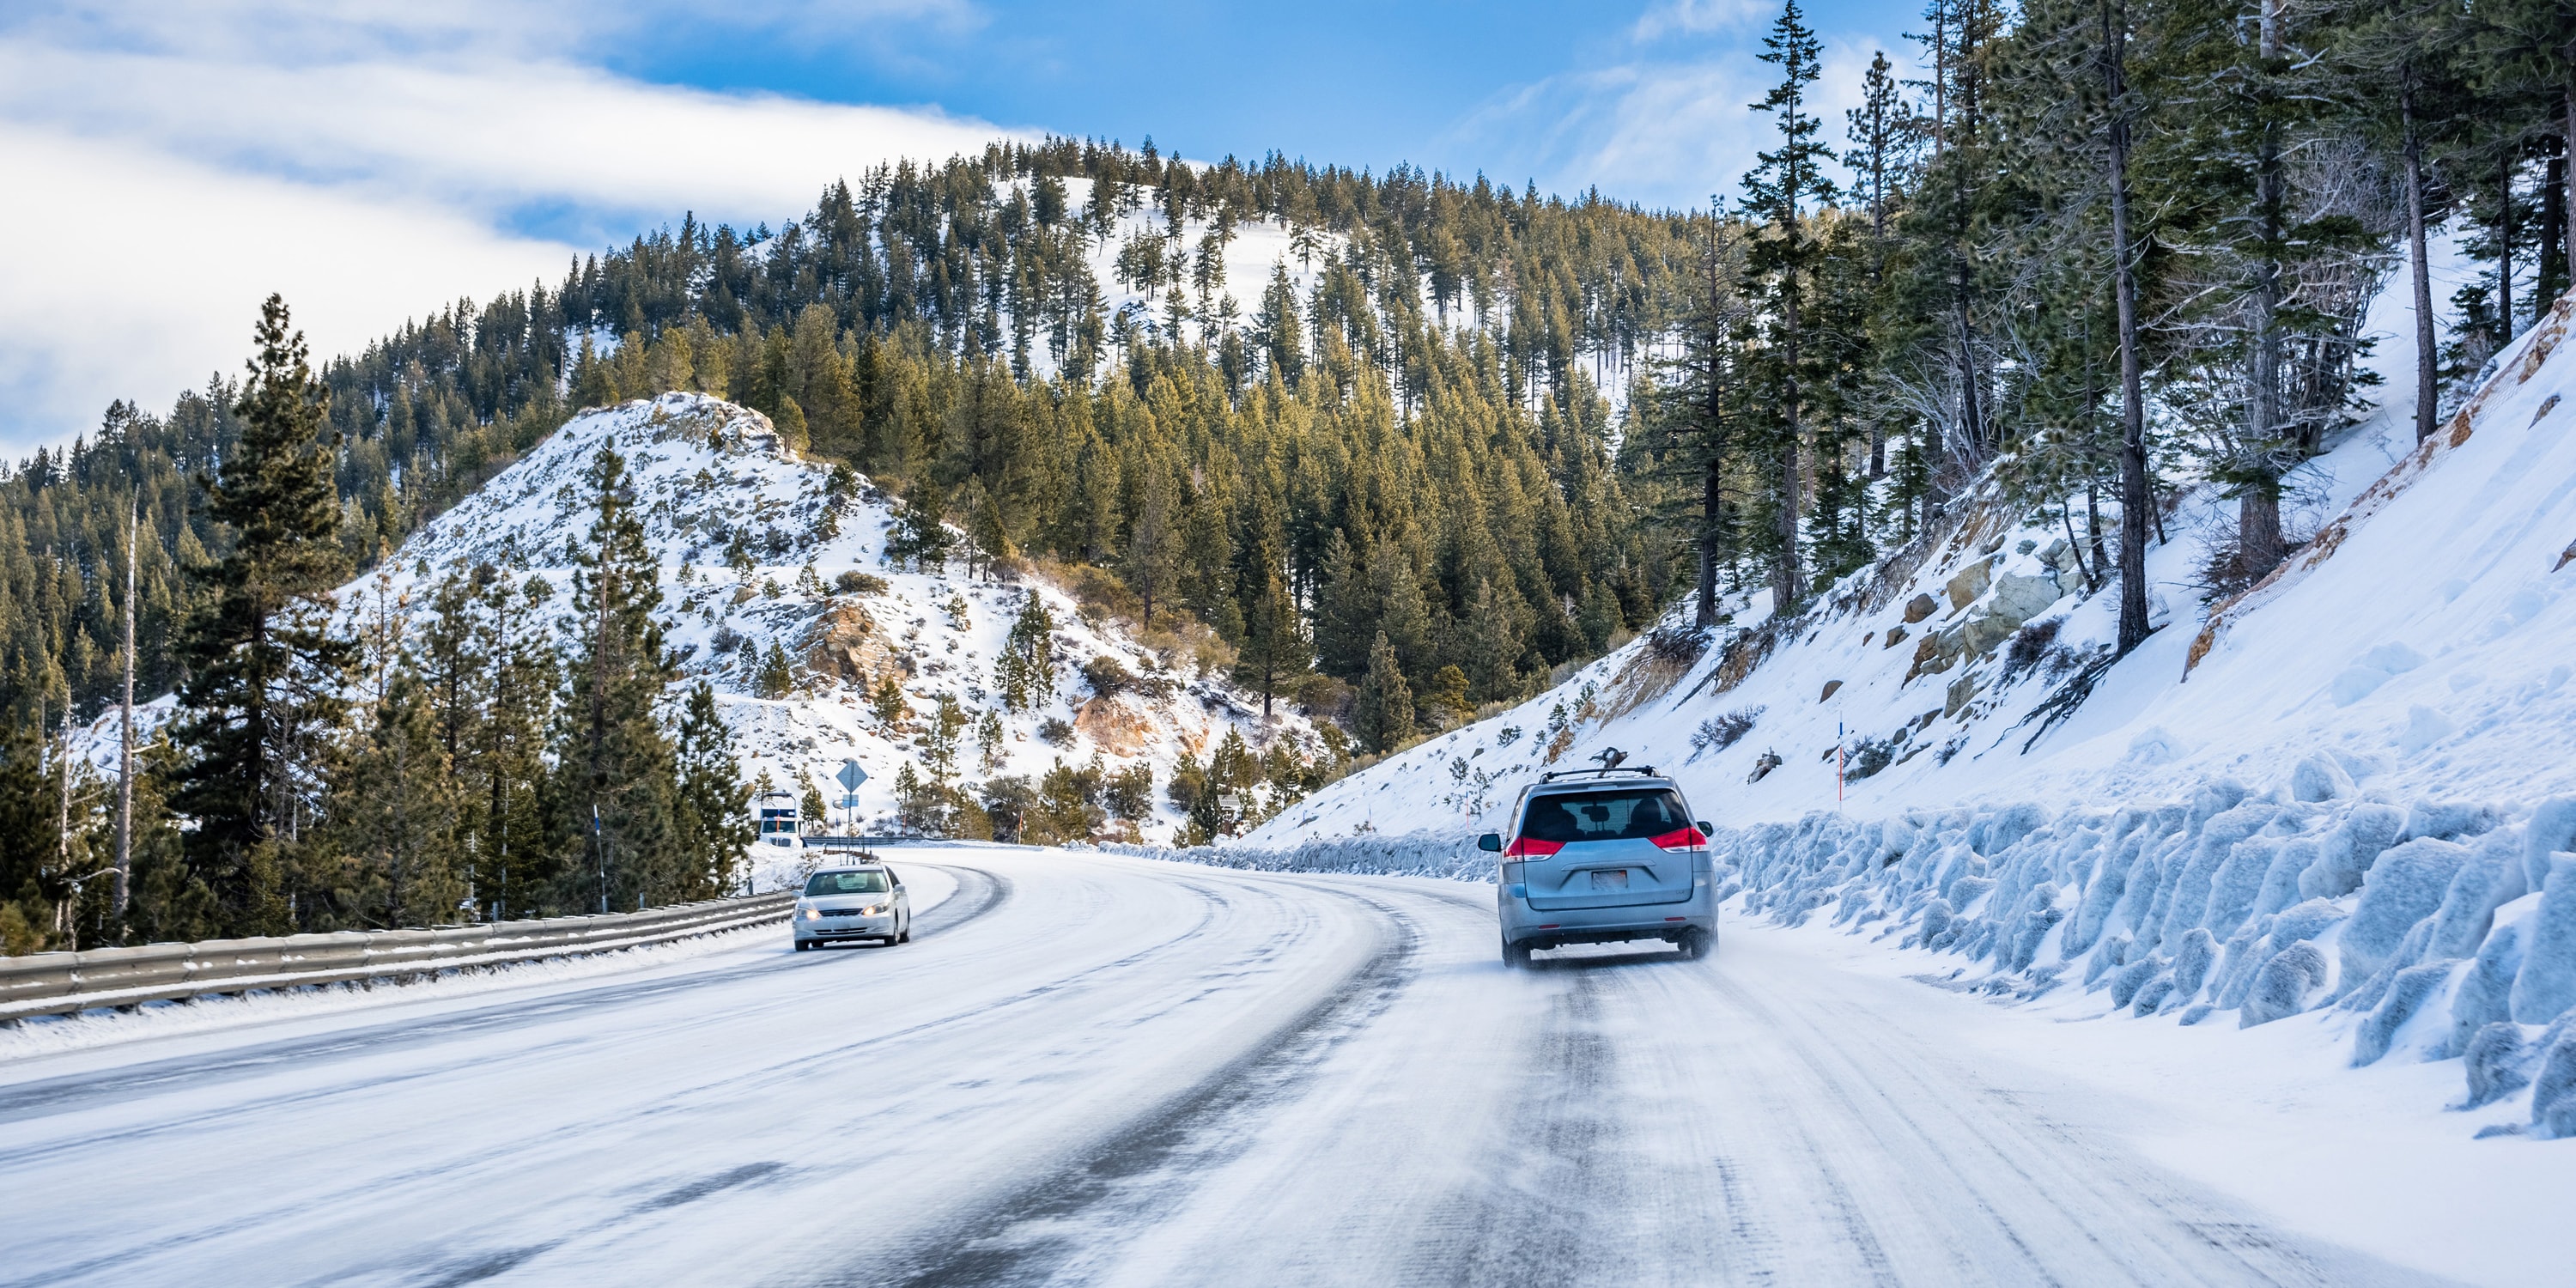 Snow Socks VS Snow Chains VS Snow Tires - What's REALLY Best on